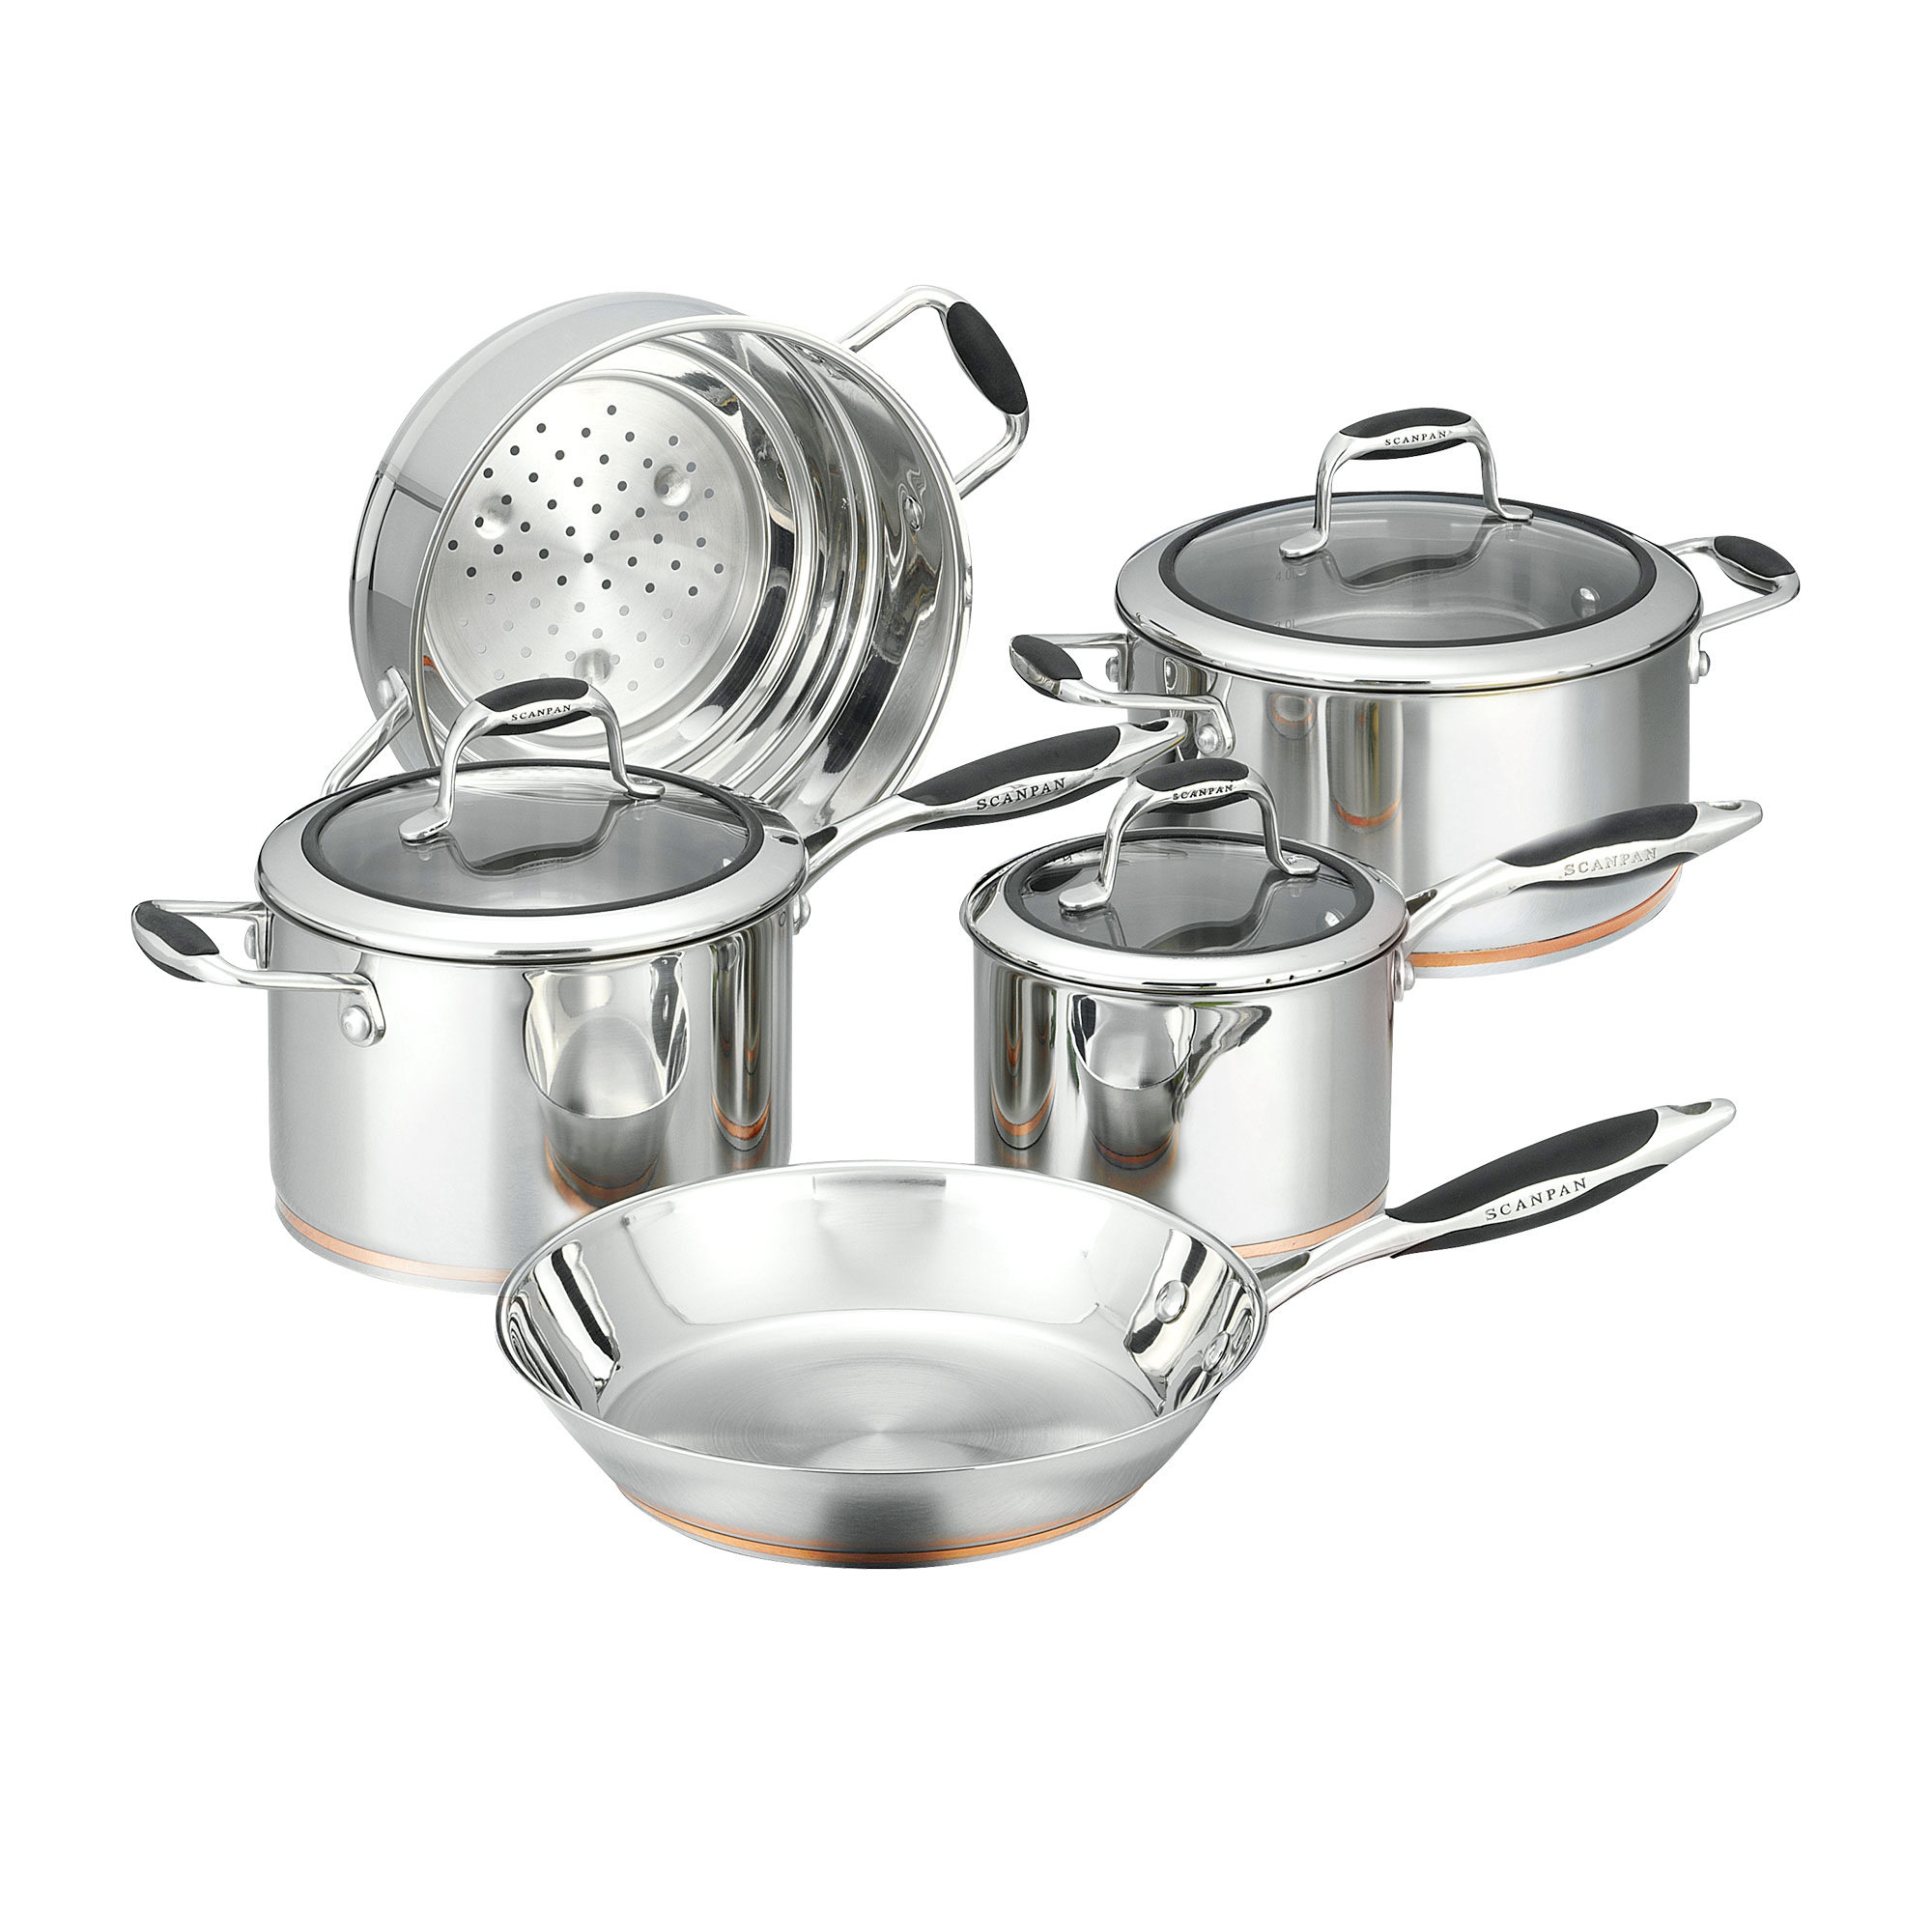 Scanpan Coppernox 5pc Stainless Steel Cookware Set Image 1